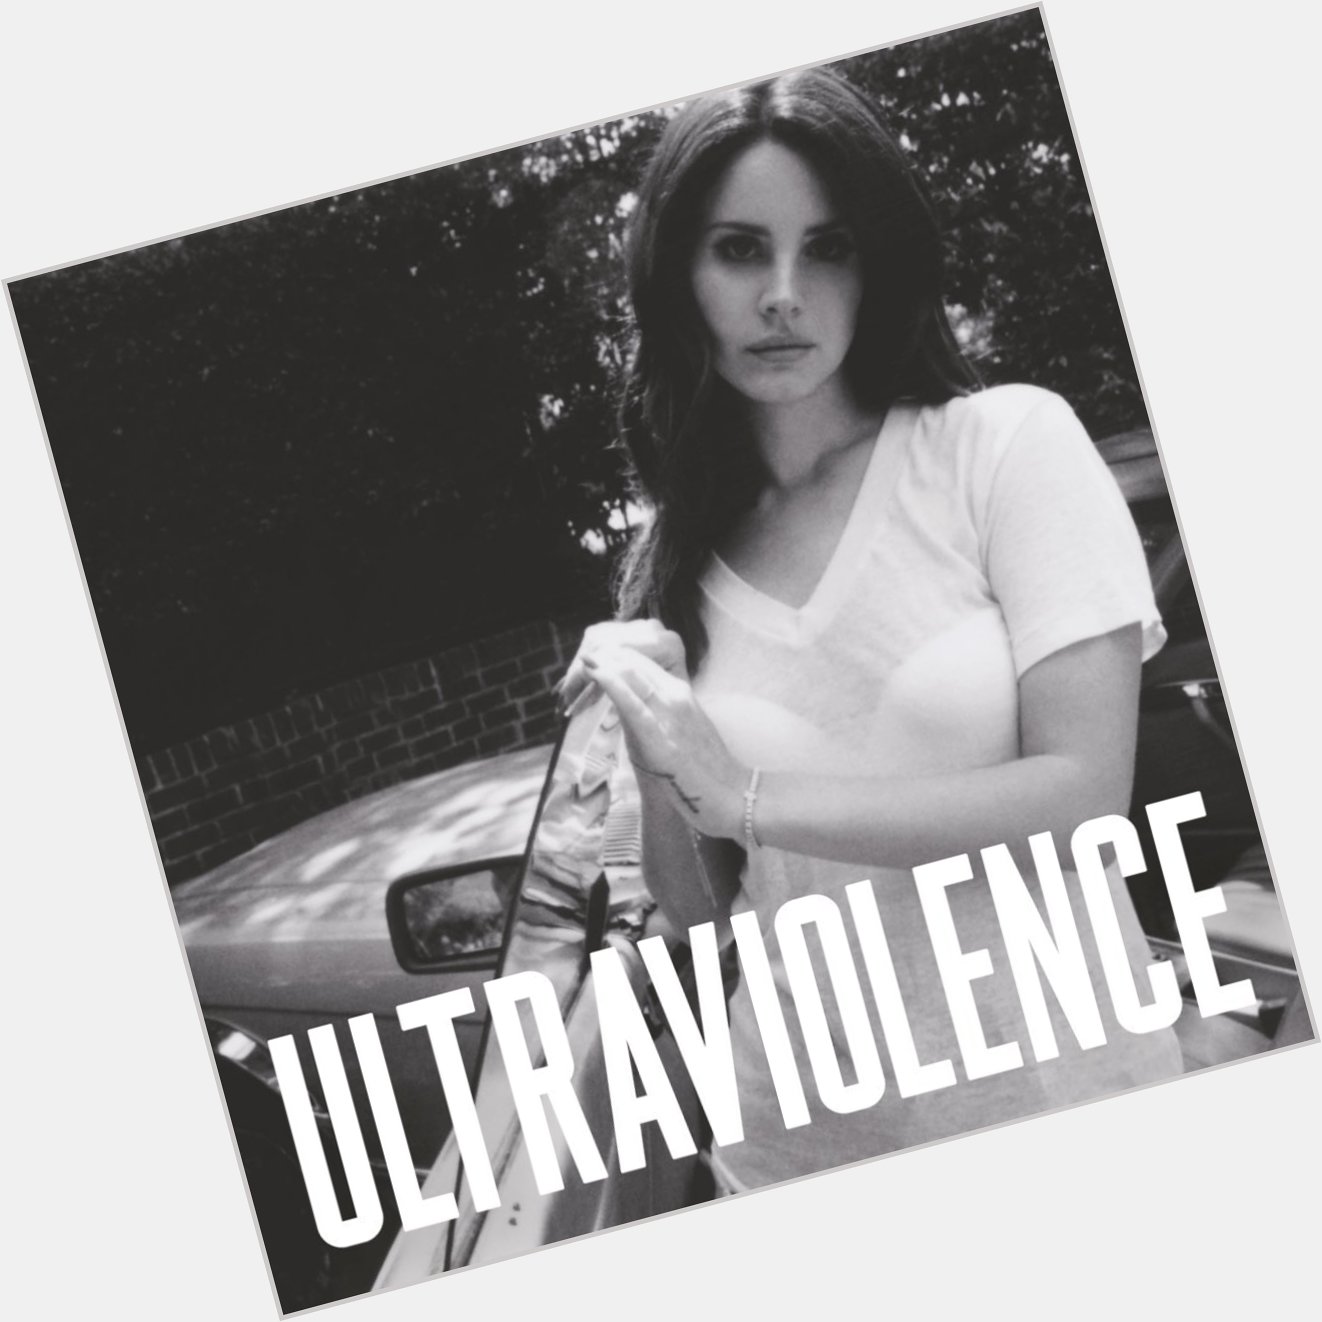 Happy Birthday Ultraviolence! 
Many are not aware that Lana Del Rey recorded this entire album live.
